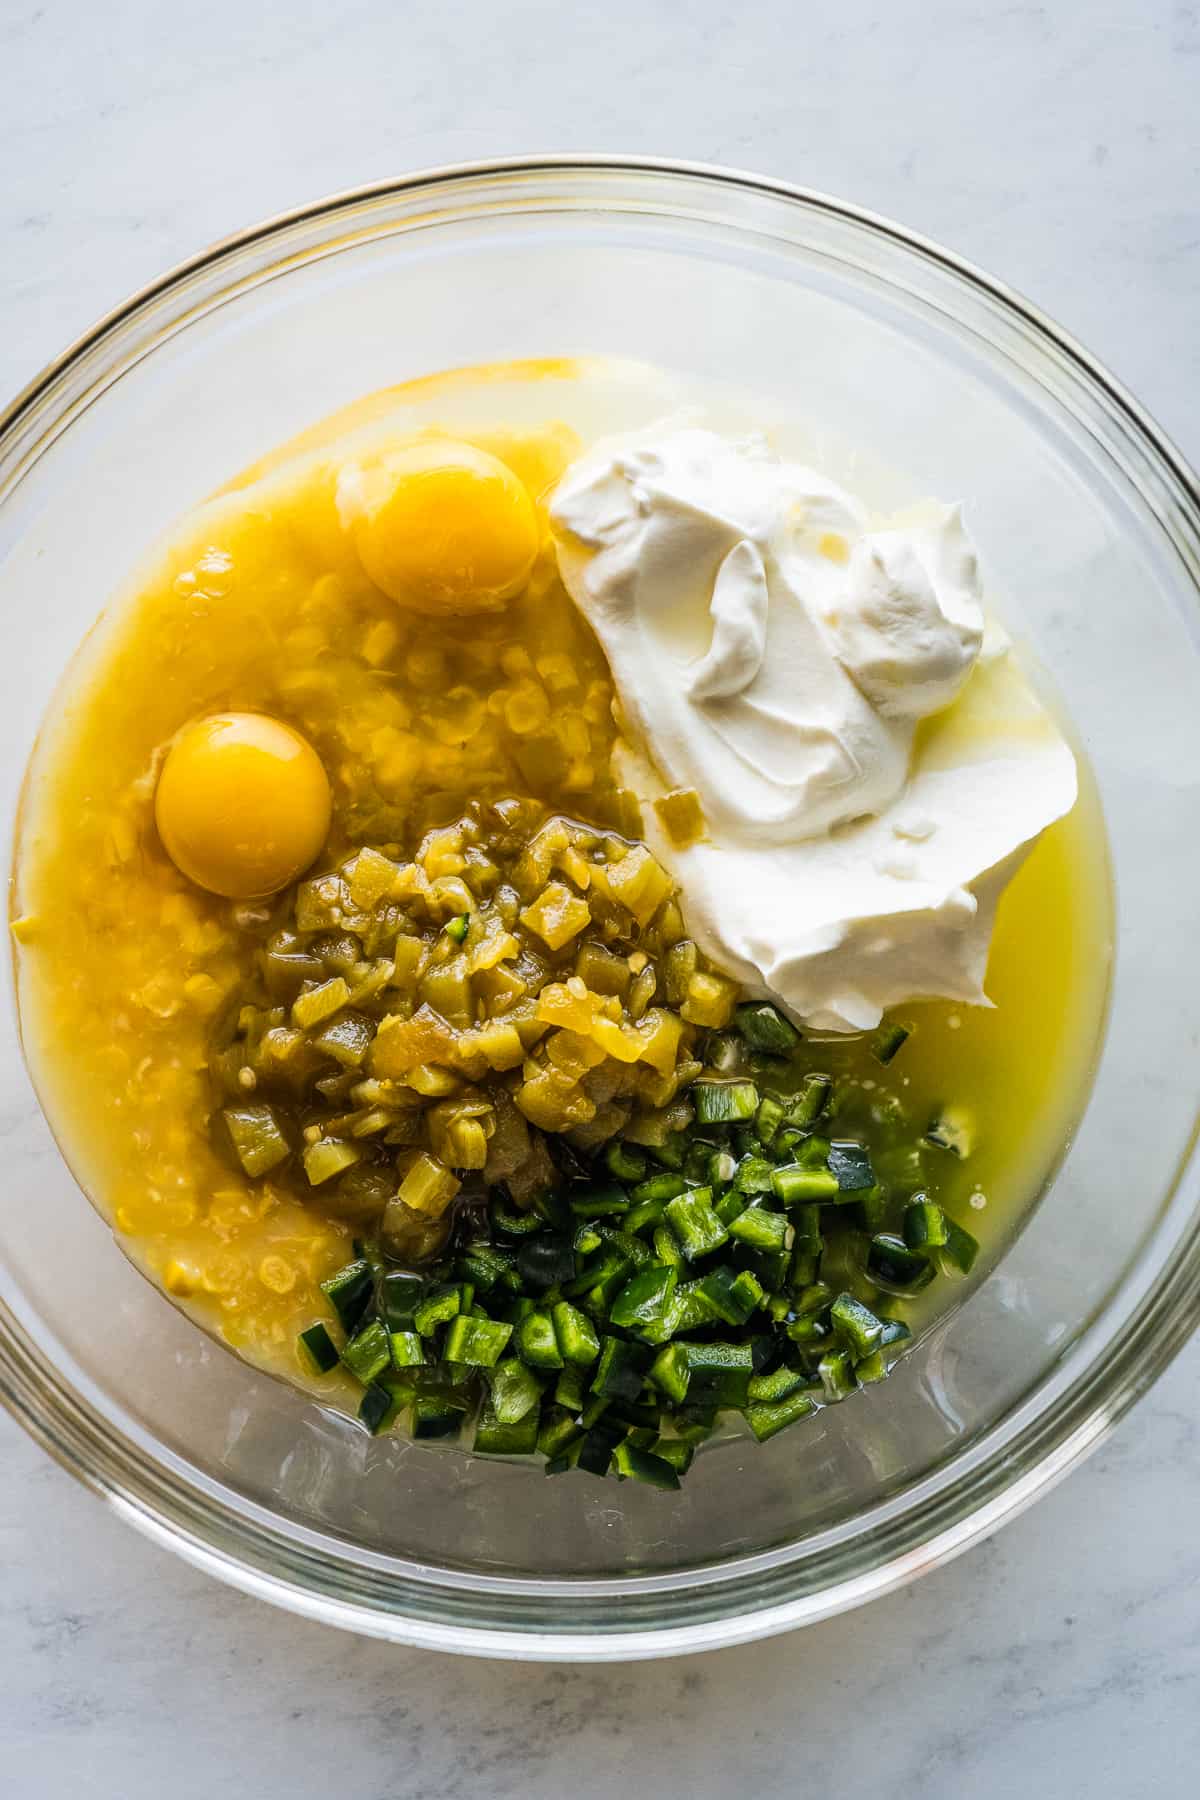 Eggs, corn, creamed corn, diced green chiles, and sour cream in a bowl.